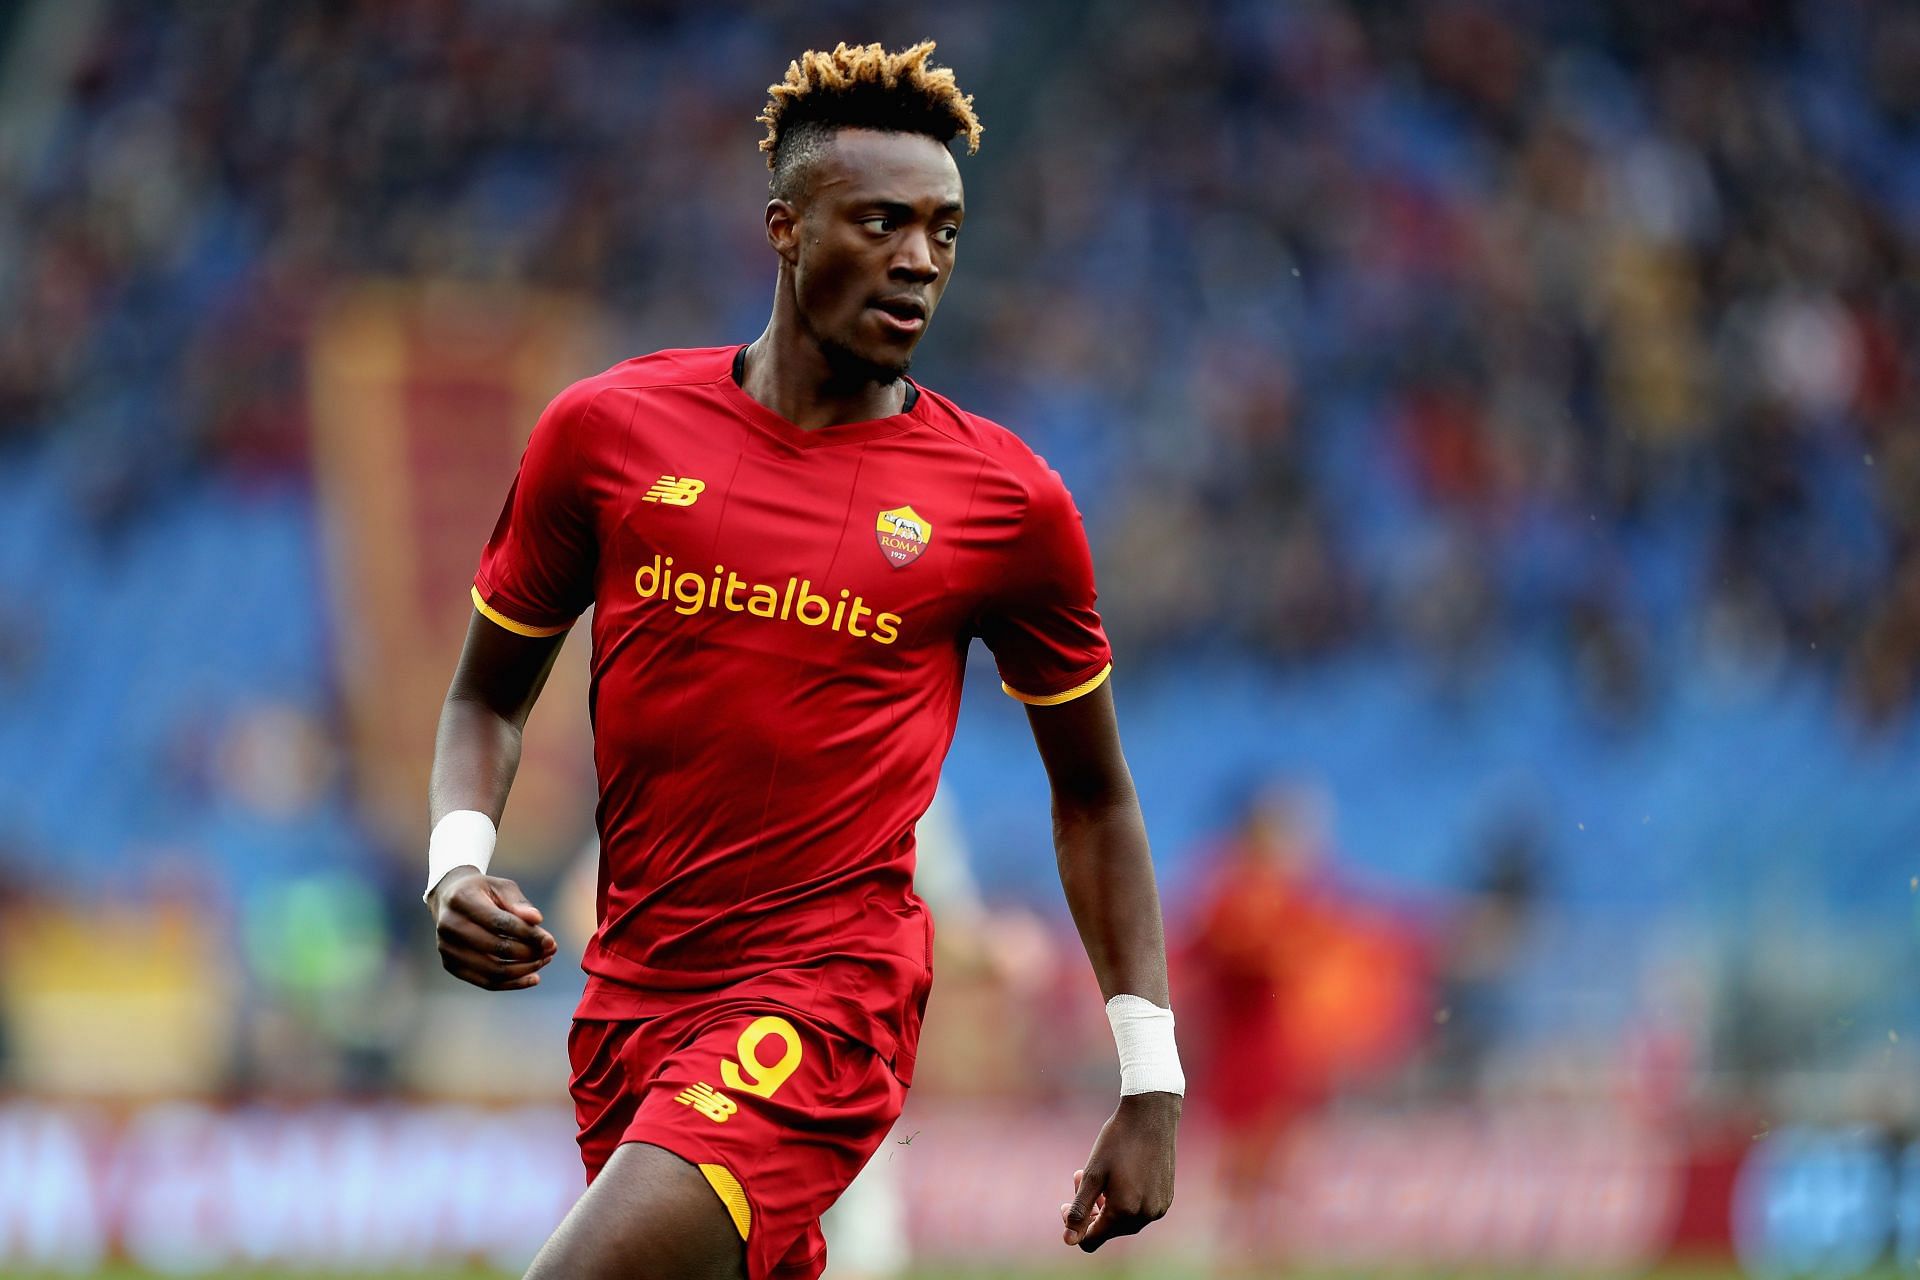 Tammy Abraham has already entered double digits in goals scored this season